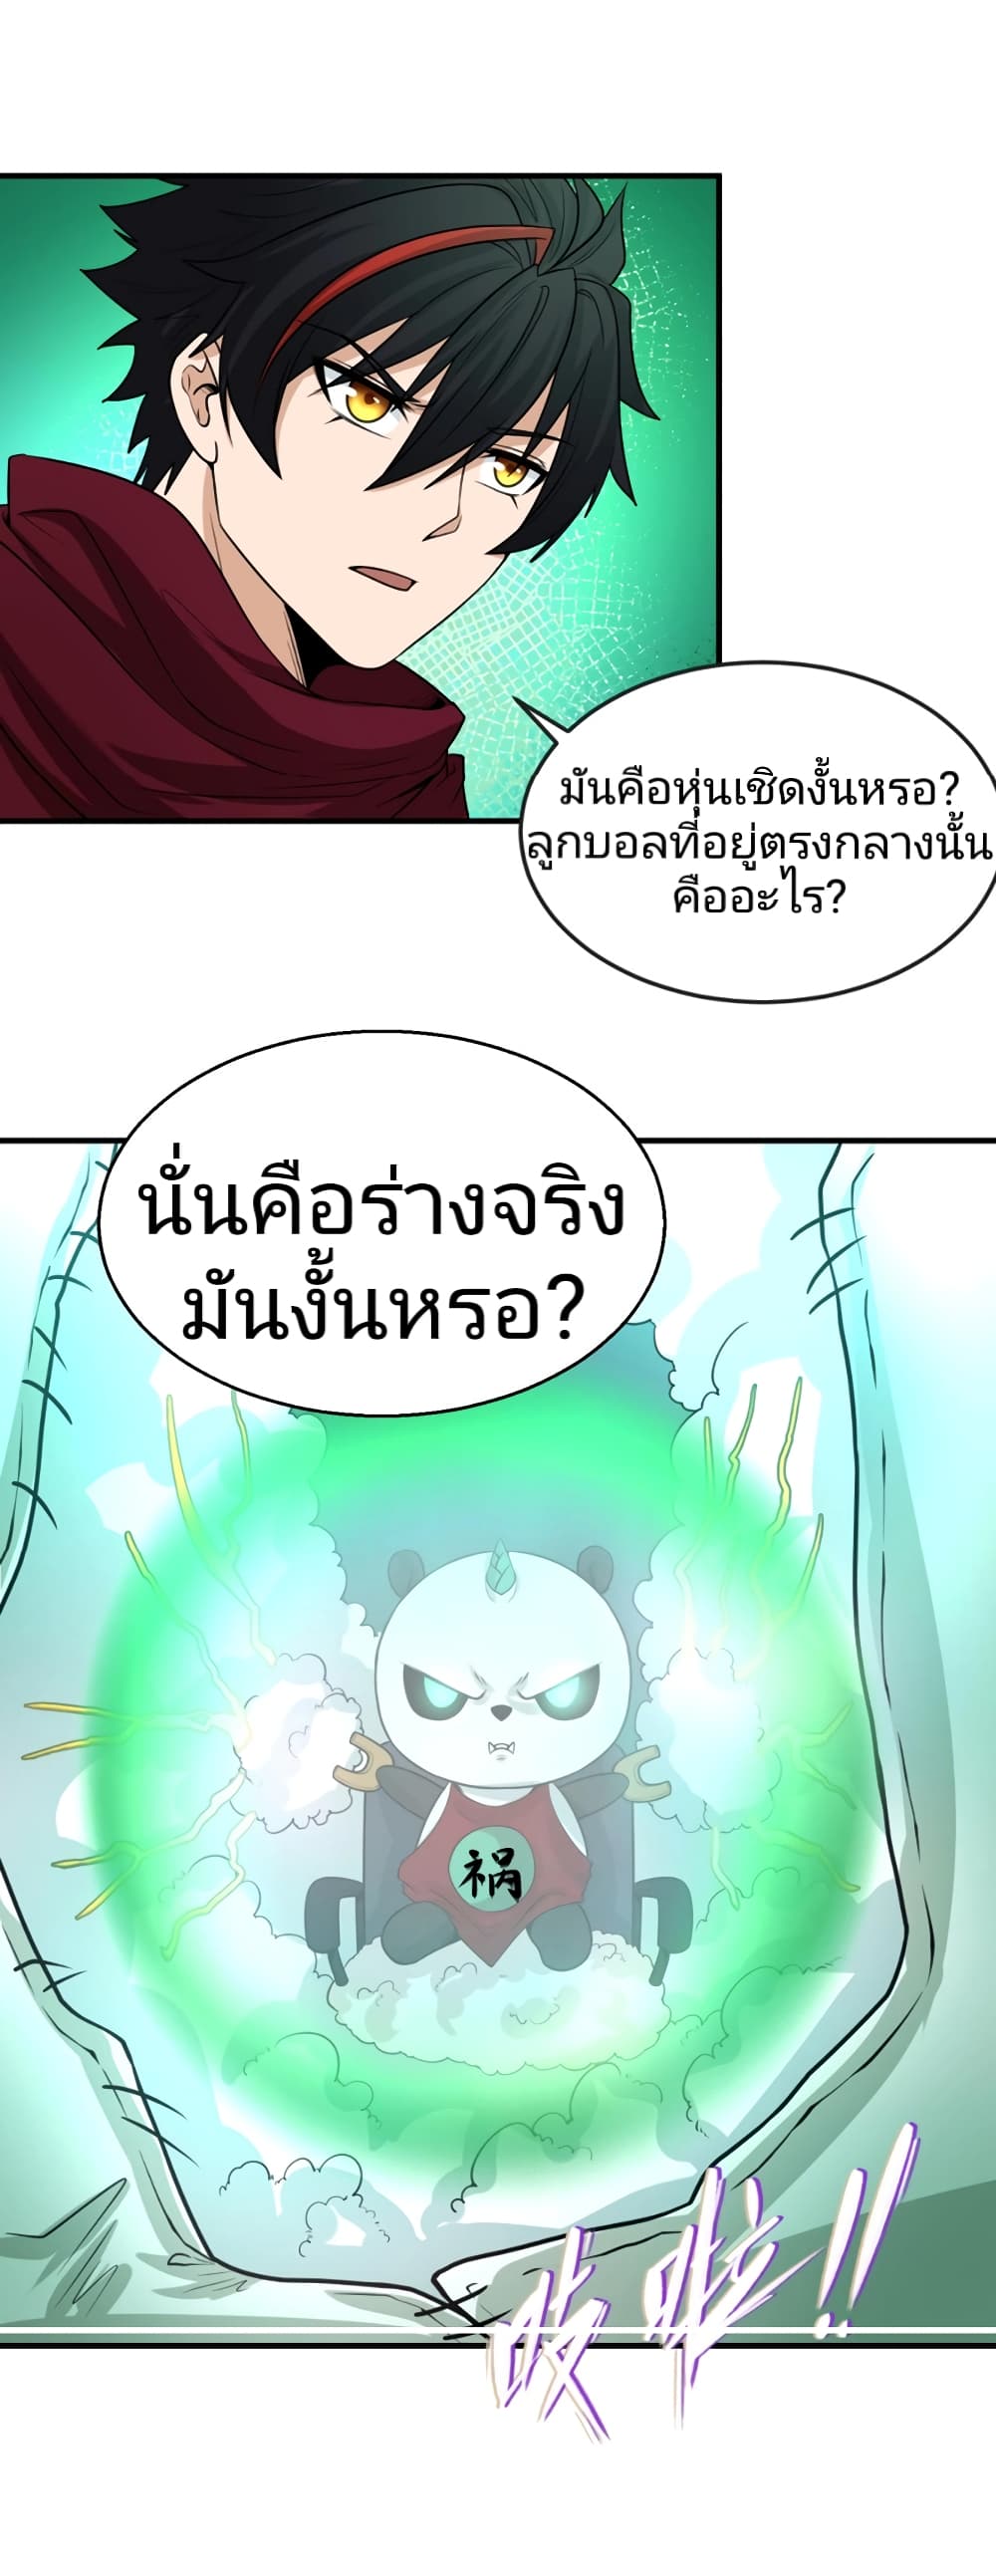 The Age of Ghost Spirits à¸à¸­à¸à¸à¸µà¹ 29 (7)